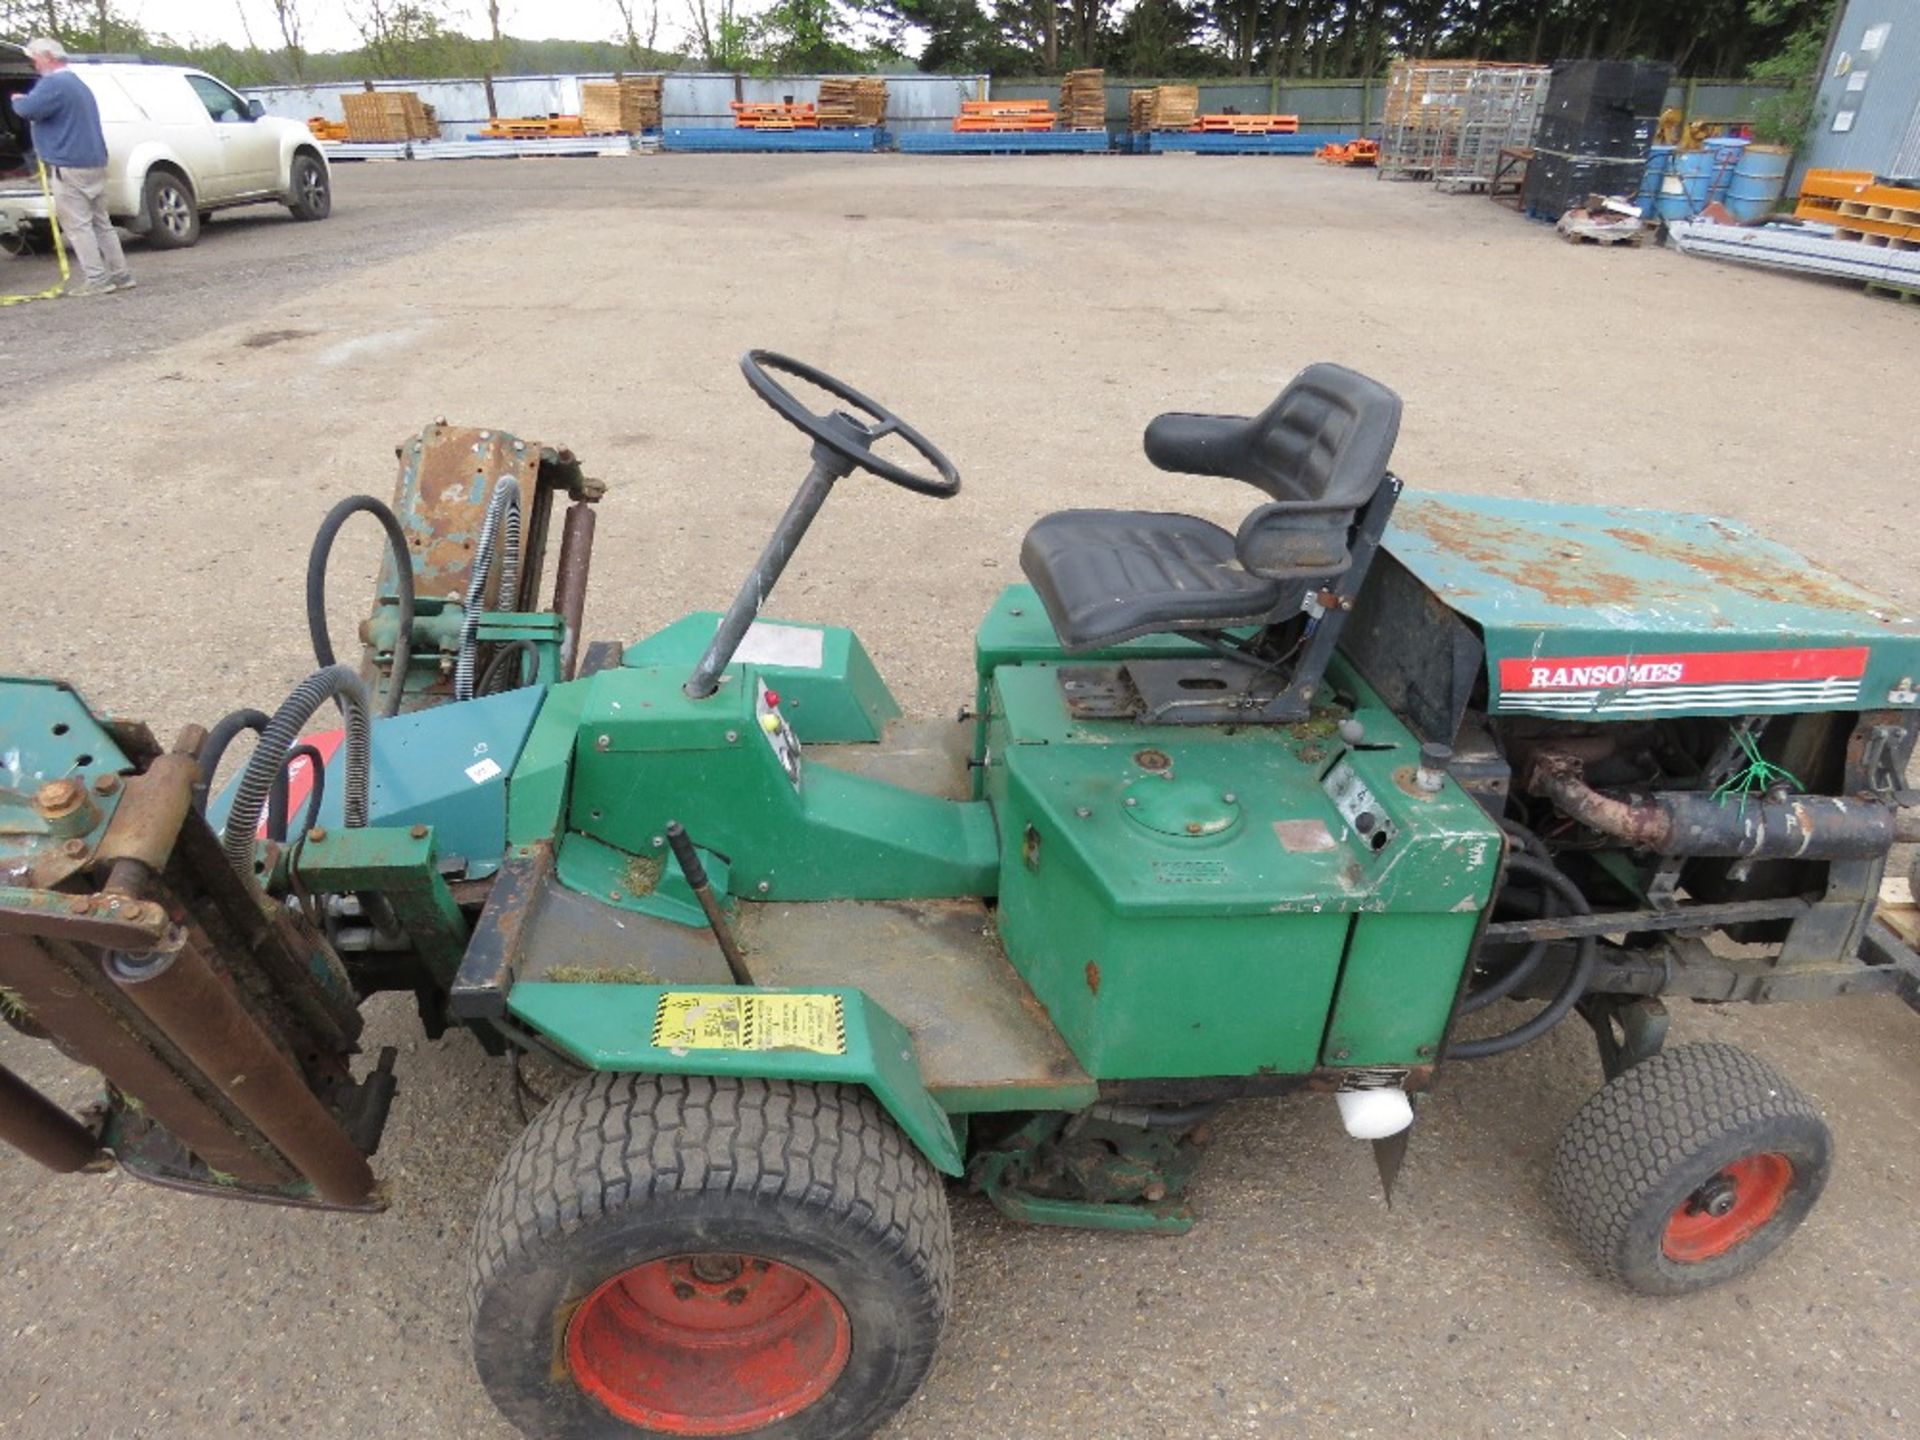 RANSOMES 213 TRIPLE MOWER WITH KUBOTA DIESEL ENGINE. WHEN TESTED WAS SEEN TO DRIVE, MOWERS TURNED AN - Image 2 of 8